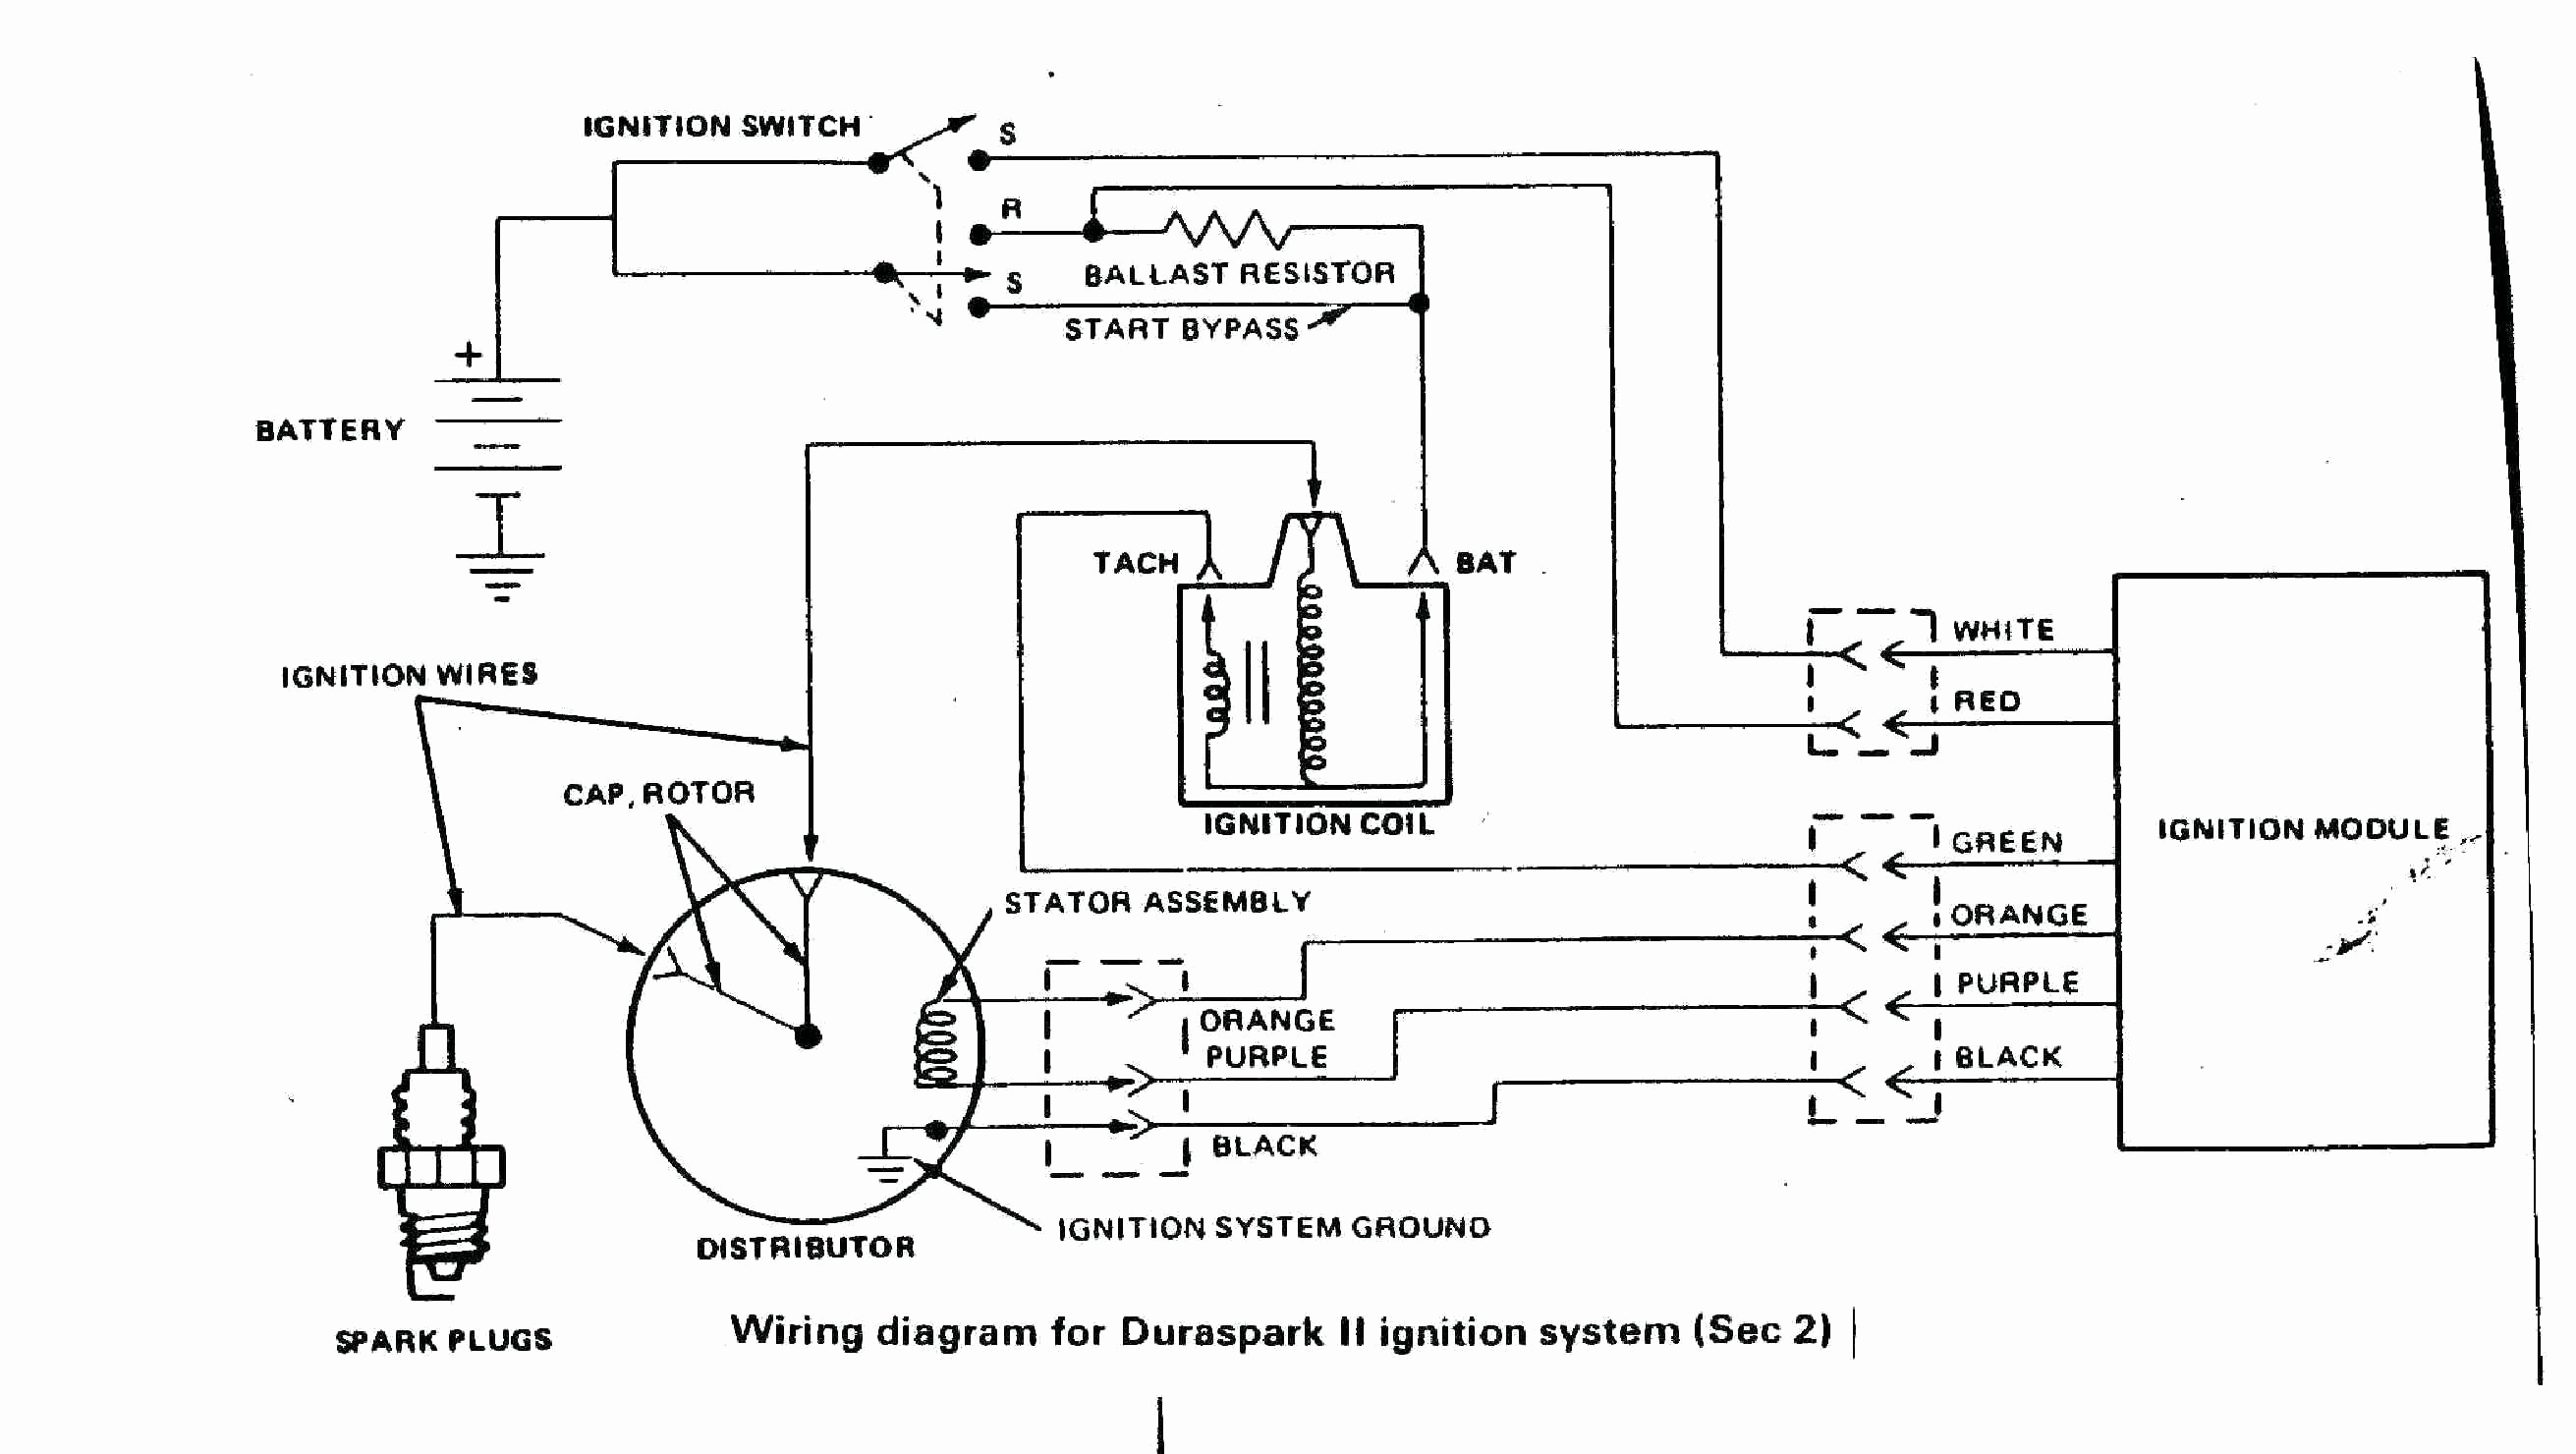 Harley Ignition Switch Wiring Diagram | Switch Wiring Diagram Free - Harley Ignition Switch Wiring Diagram